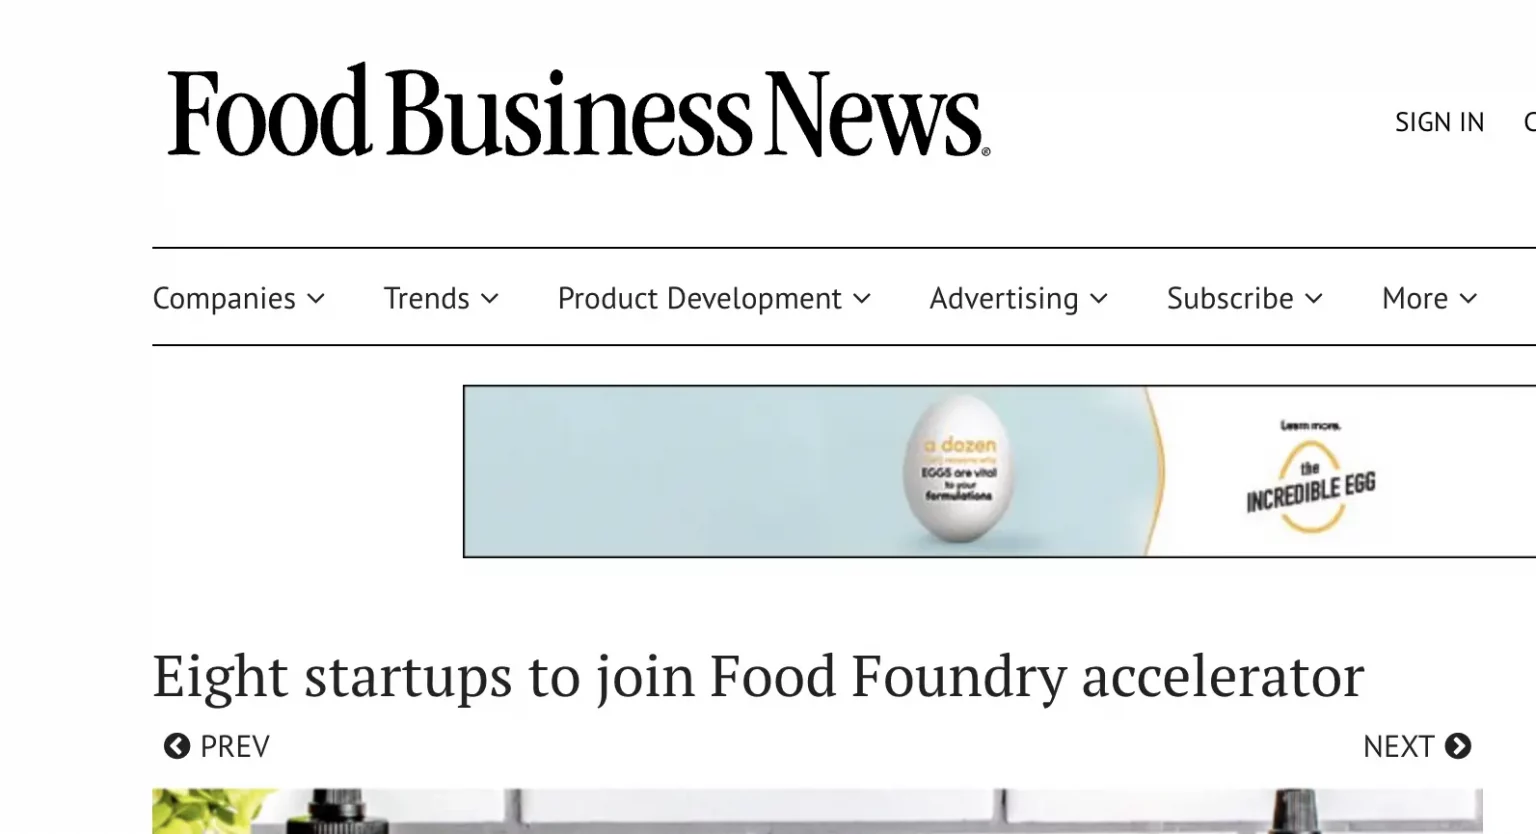 8 startups to join Food Foundry accelertor